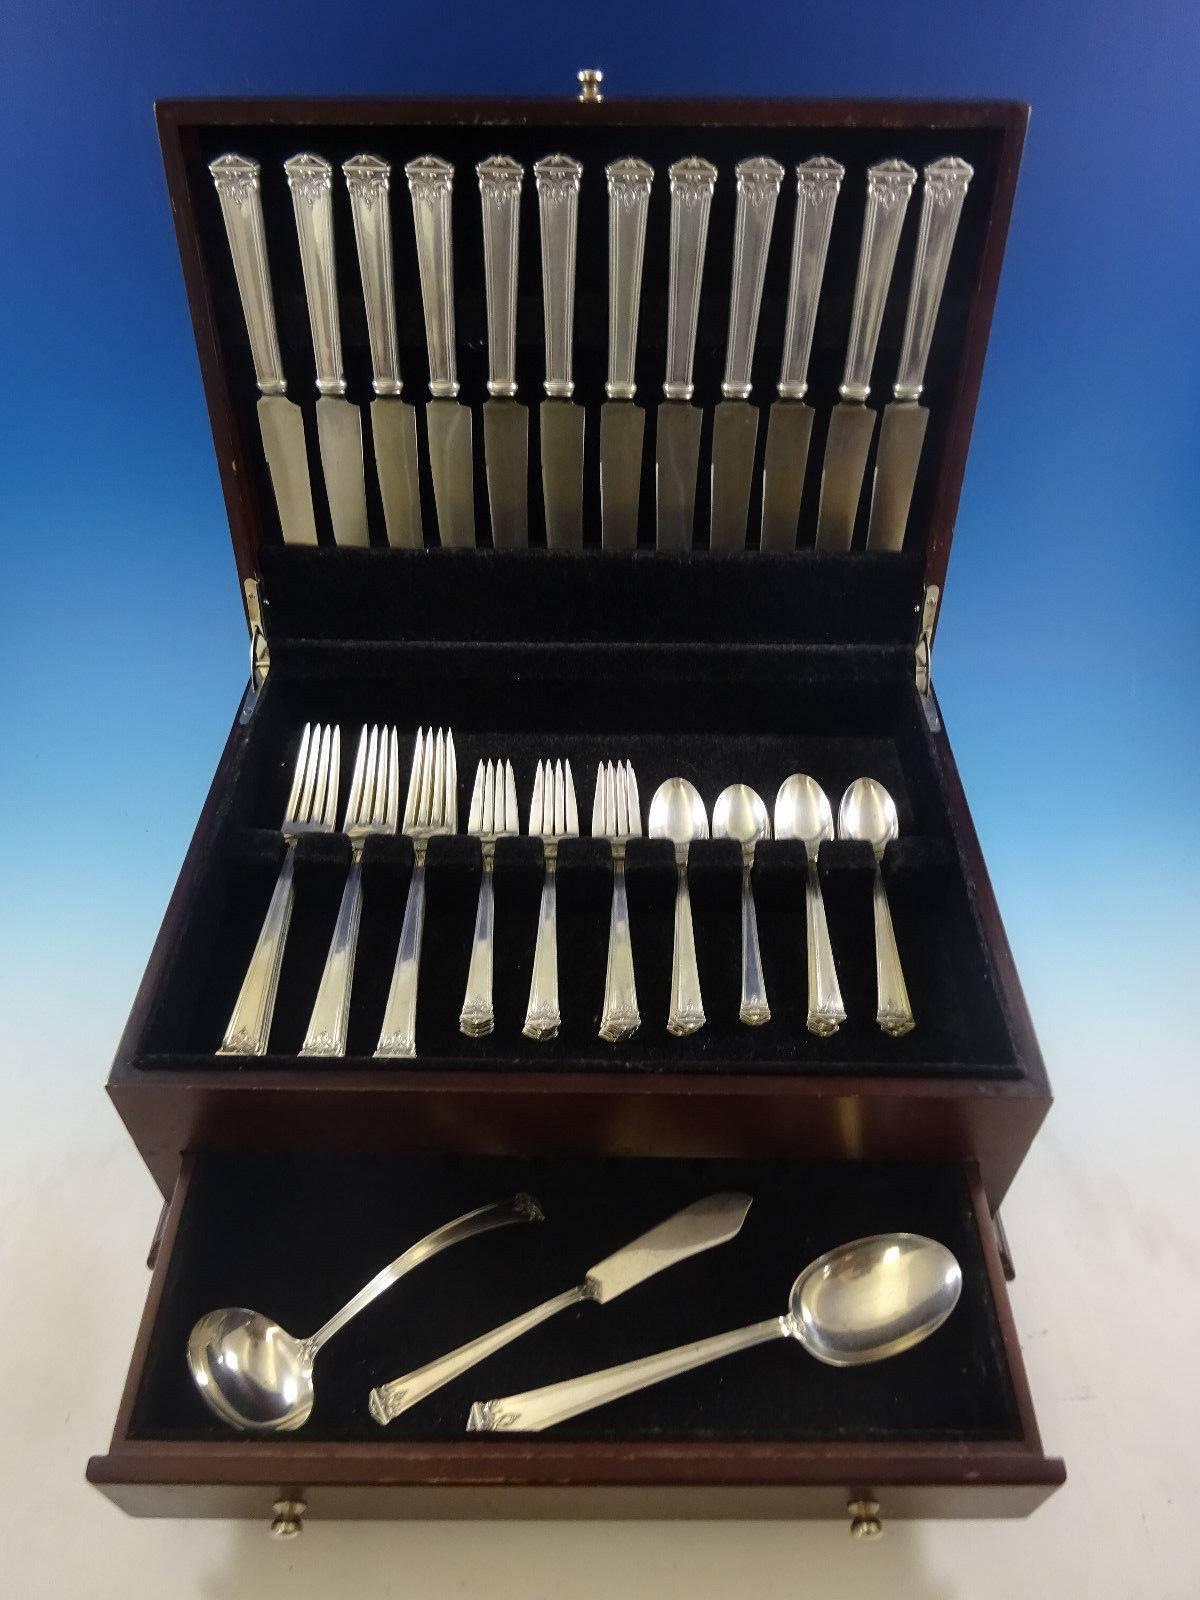 Dinner size Trianon by international sterling silver flatware set, 51 pieces. This set includes: 

12 dinner size knives, 9 1/2